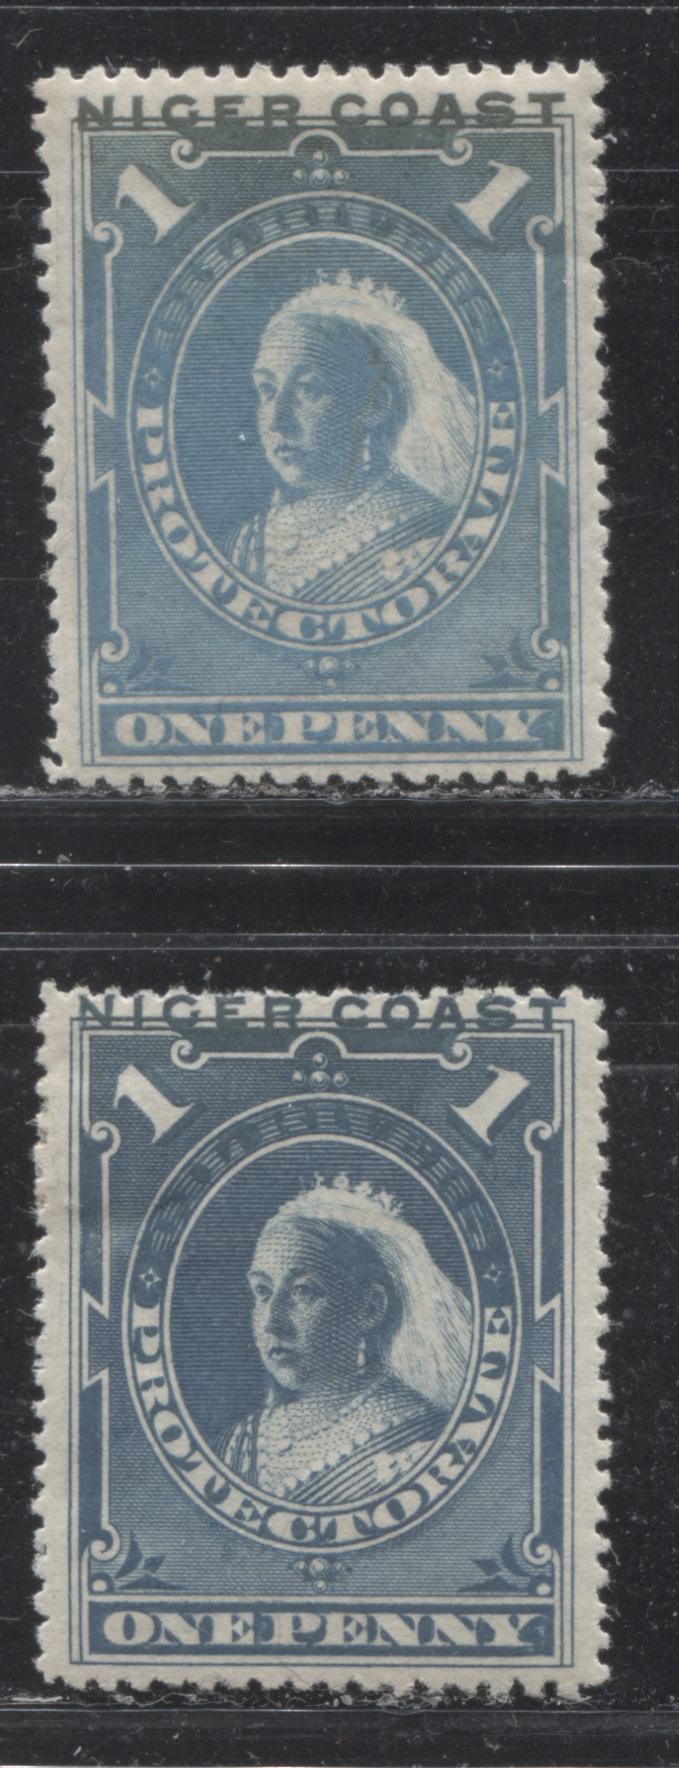 Lot 187 Niger Coast Protectorate SG#46, 46b 1d Deep Dull Blue and Dull Blue Queen Victoria 1894 Obliterated "Oil Rivers" Waterlow Issue, Two VFOG Examples, Perf. 14.5-15, 39,400 Issued, SG Cat. 13.5 GBP = Approximately $22.95 For Fine OG, Est. $15